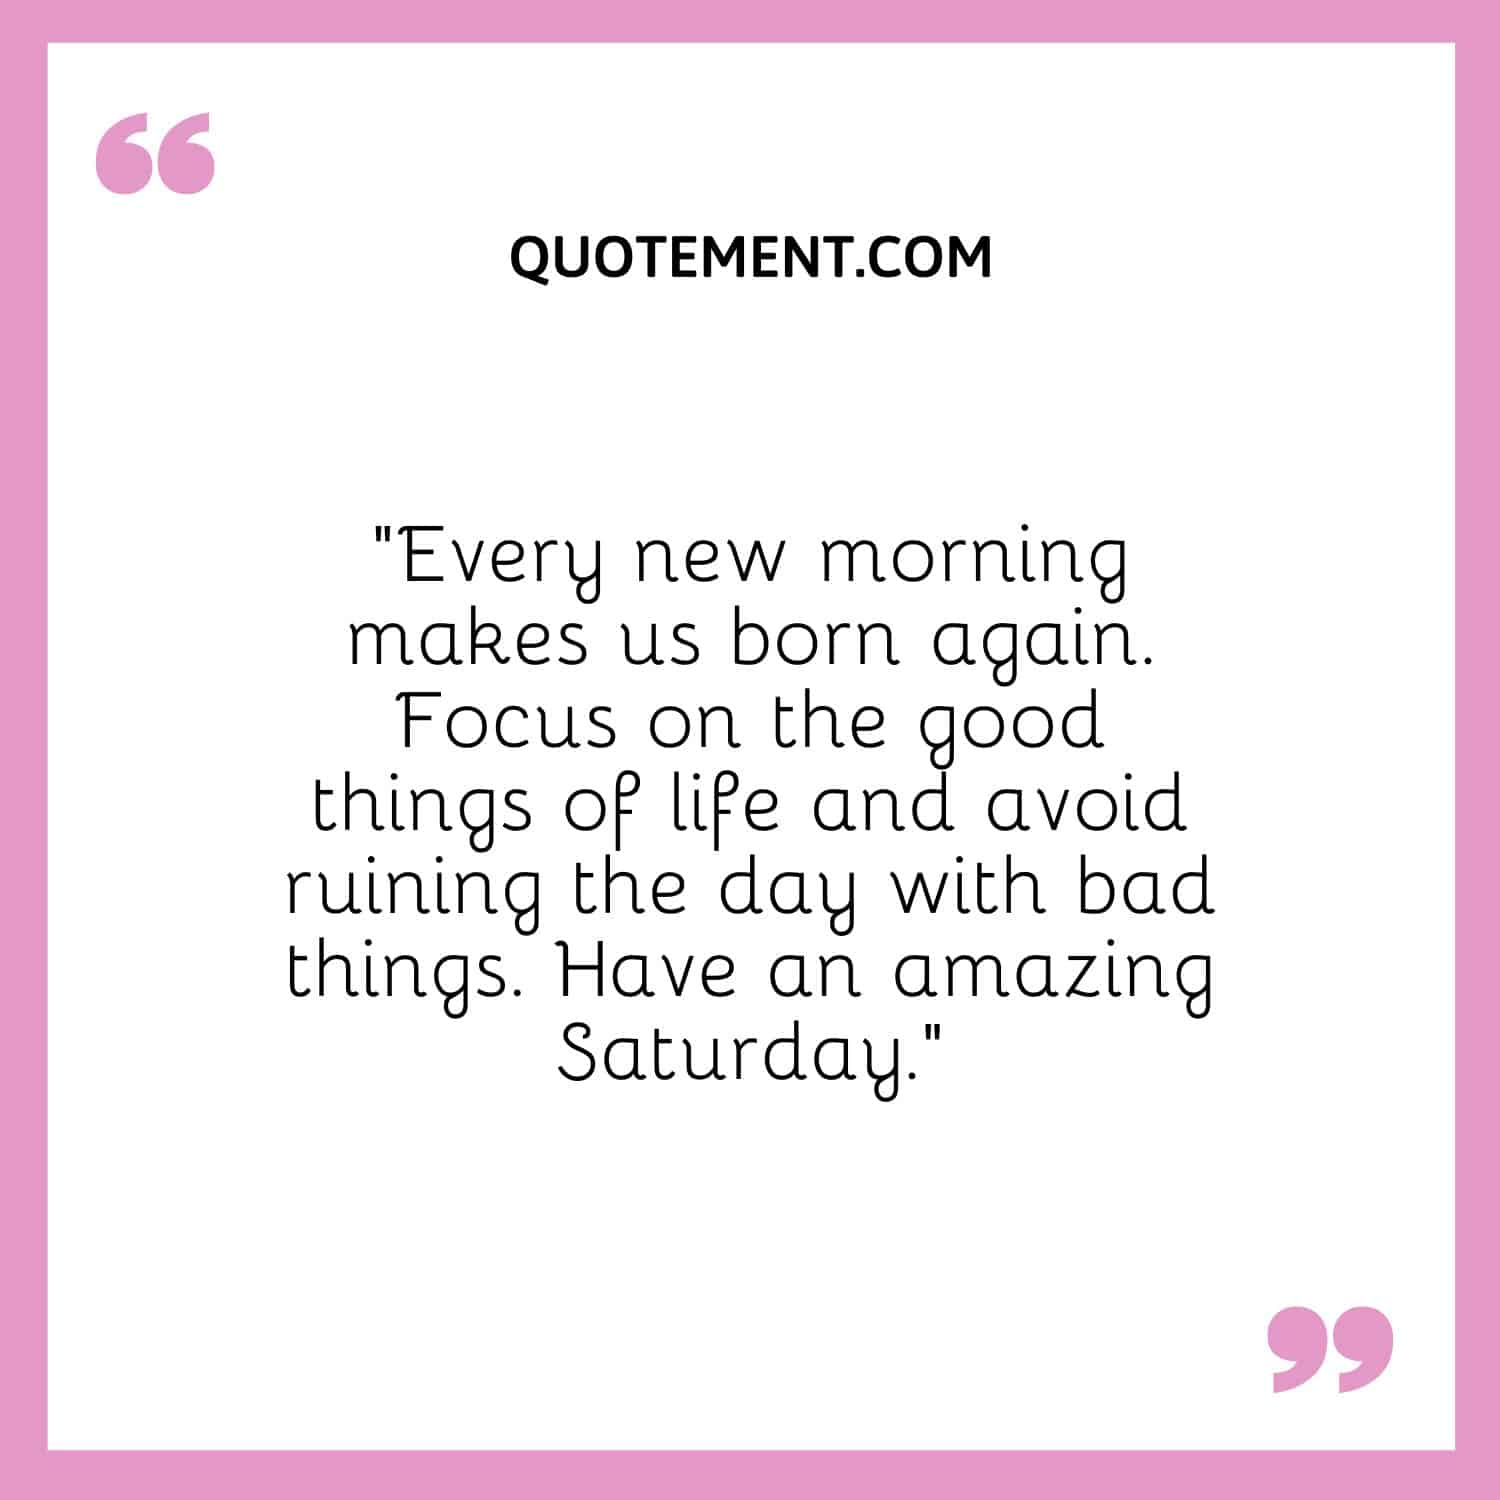 “Every new morning makes us born again. Focus on the good things of life and avoid ruining the day with bad things. Have an amazing Saturday.”